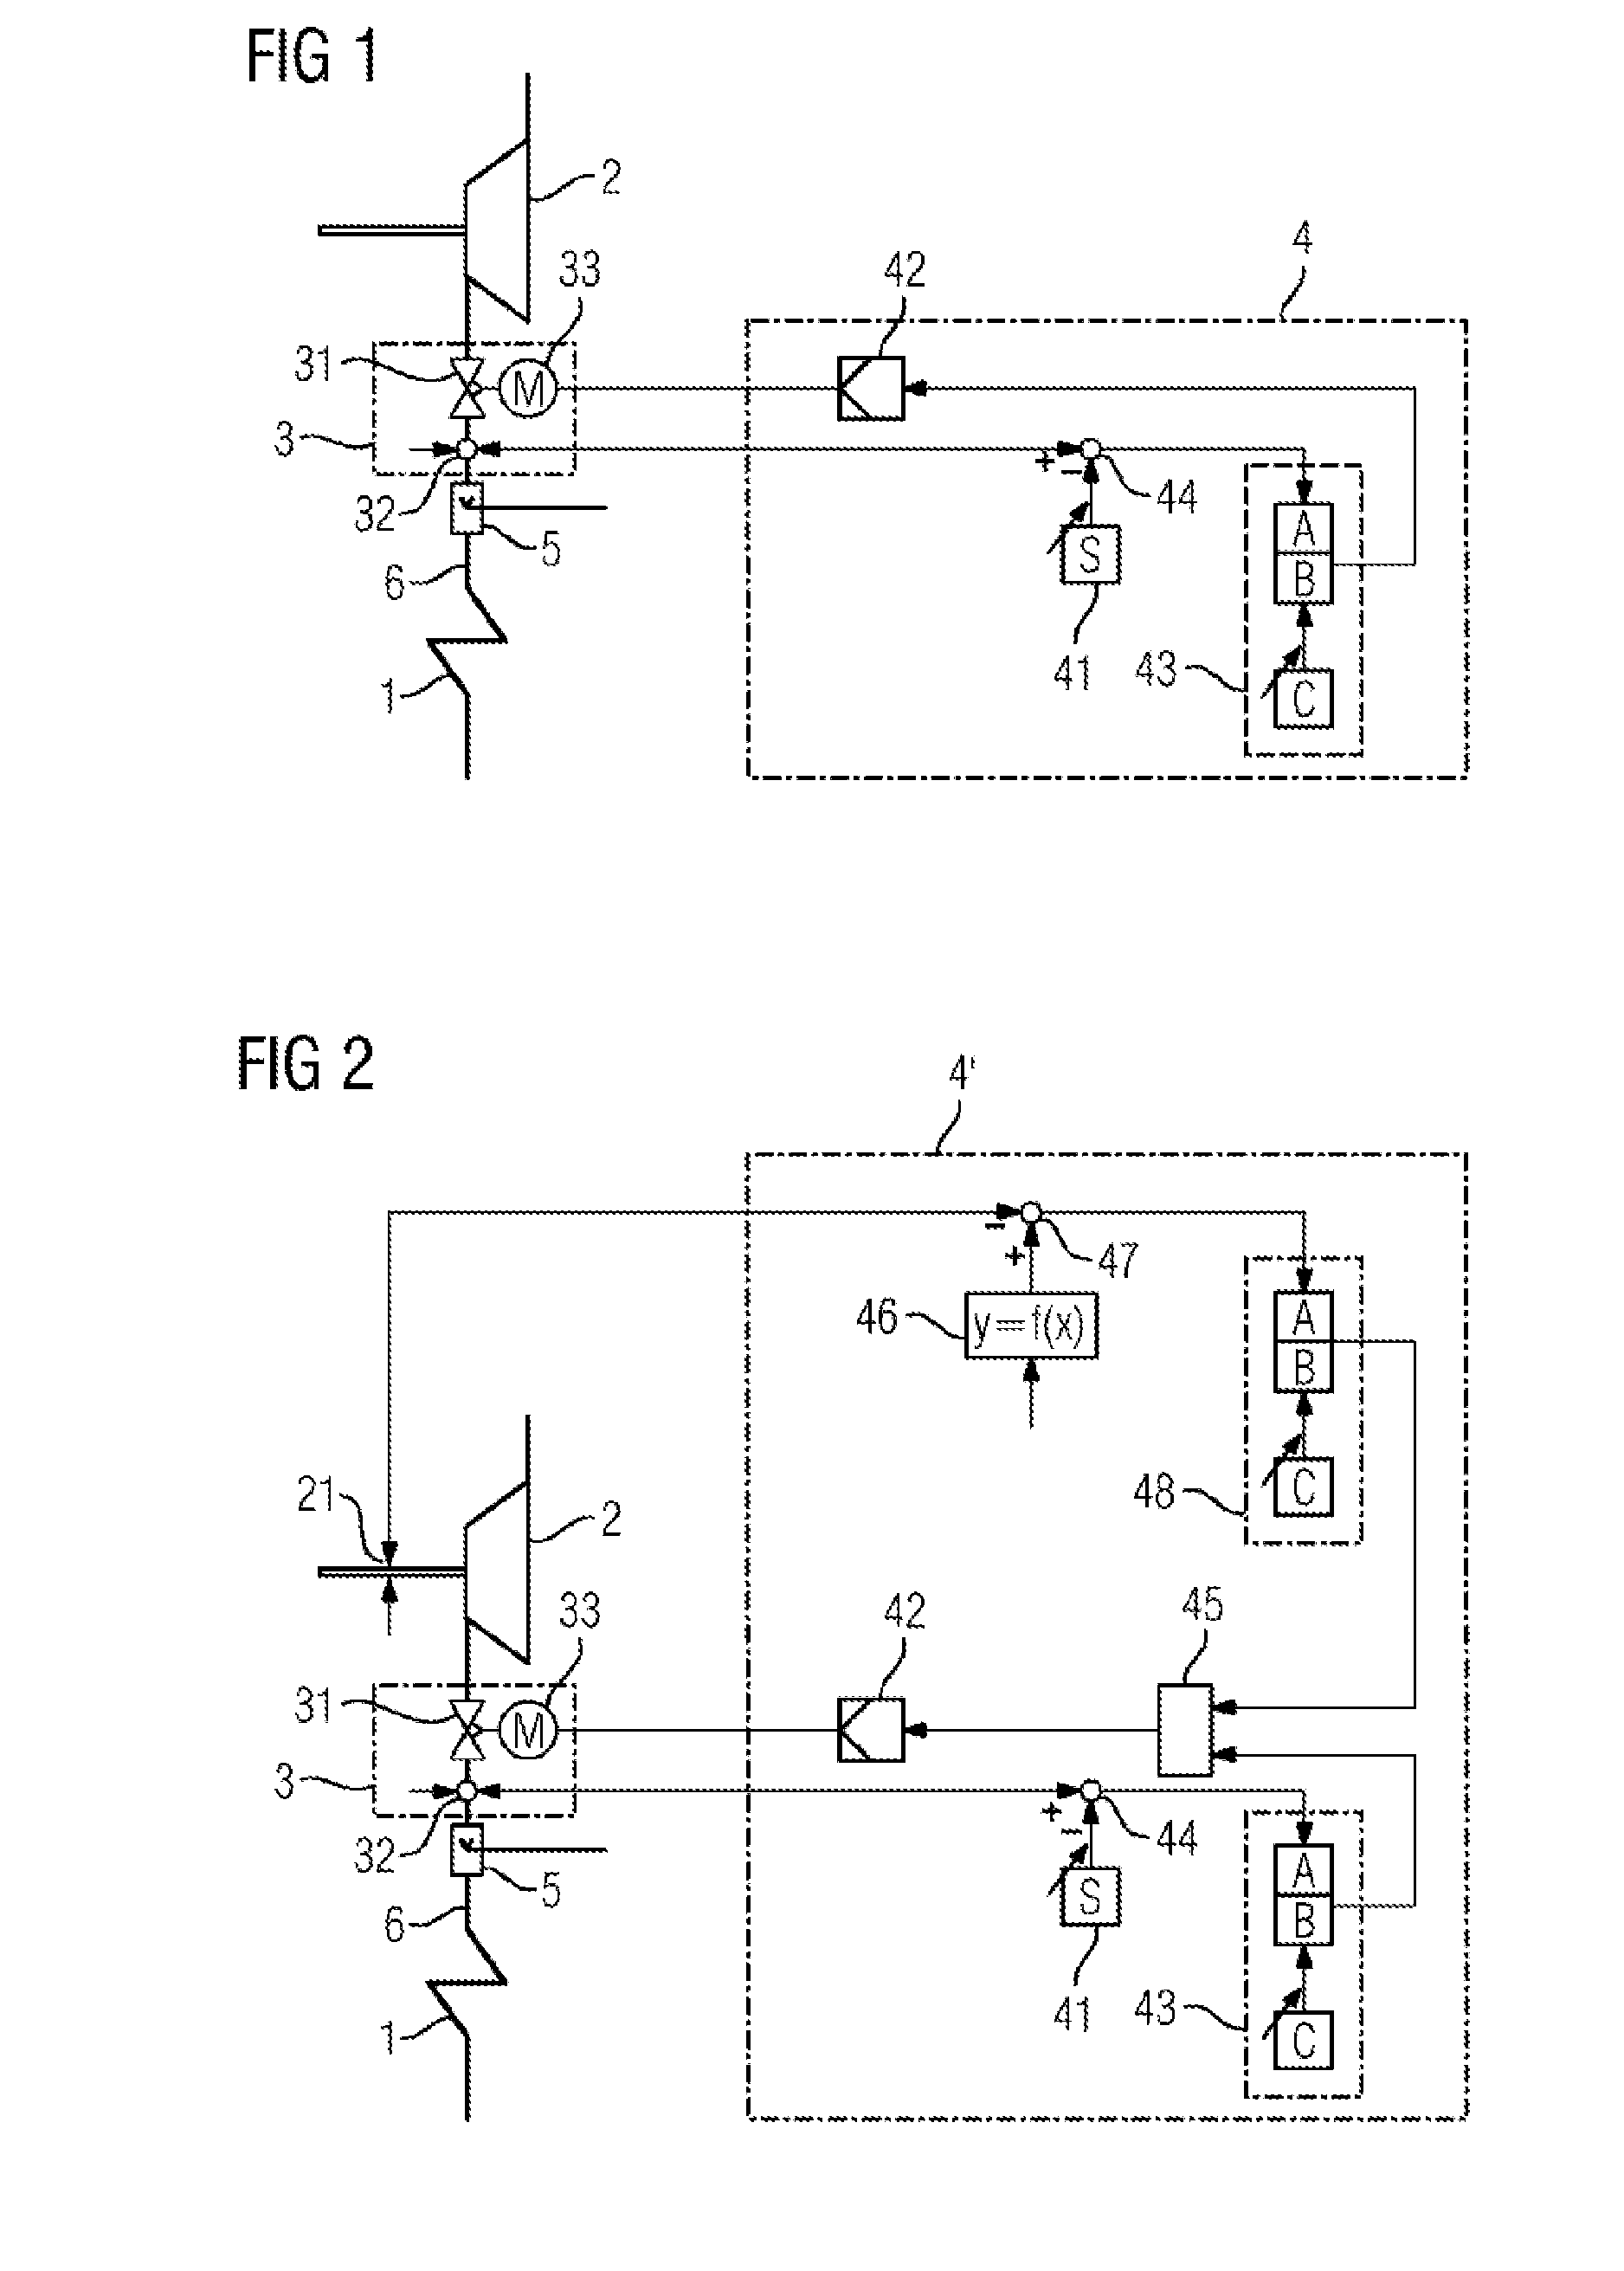 Operating method for an externally heated forced-flow steam generator